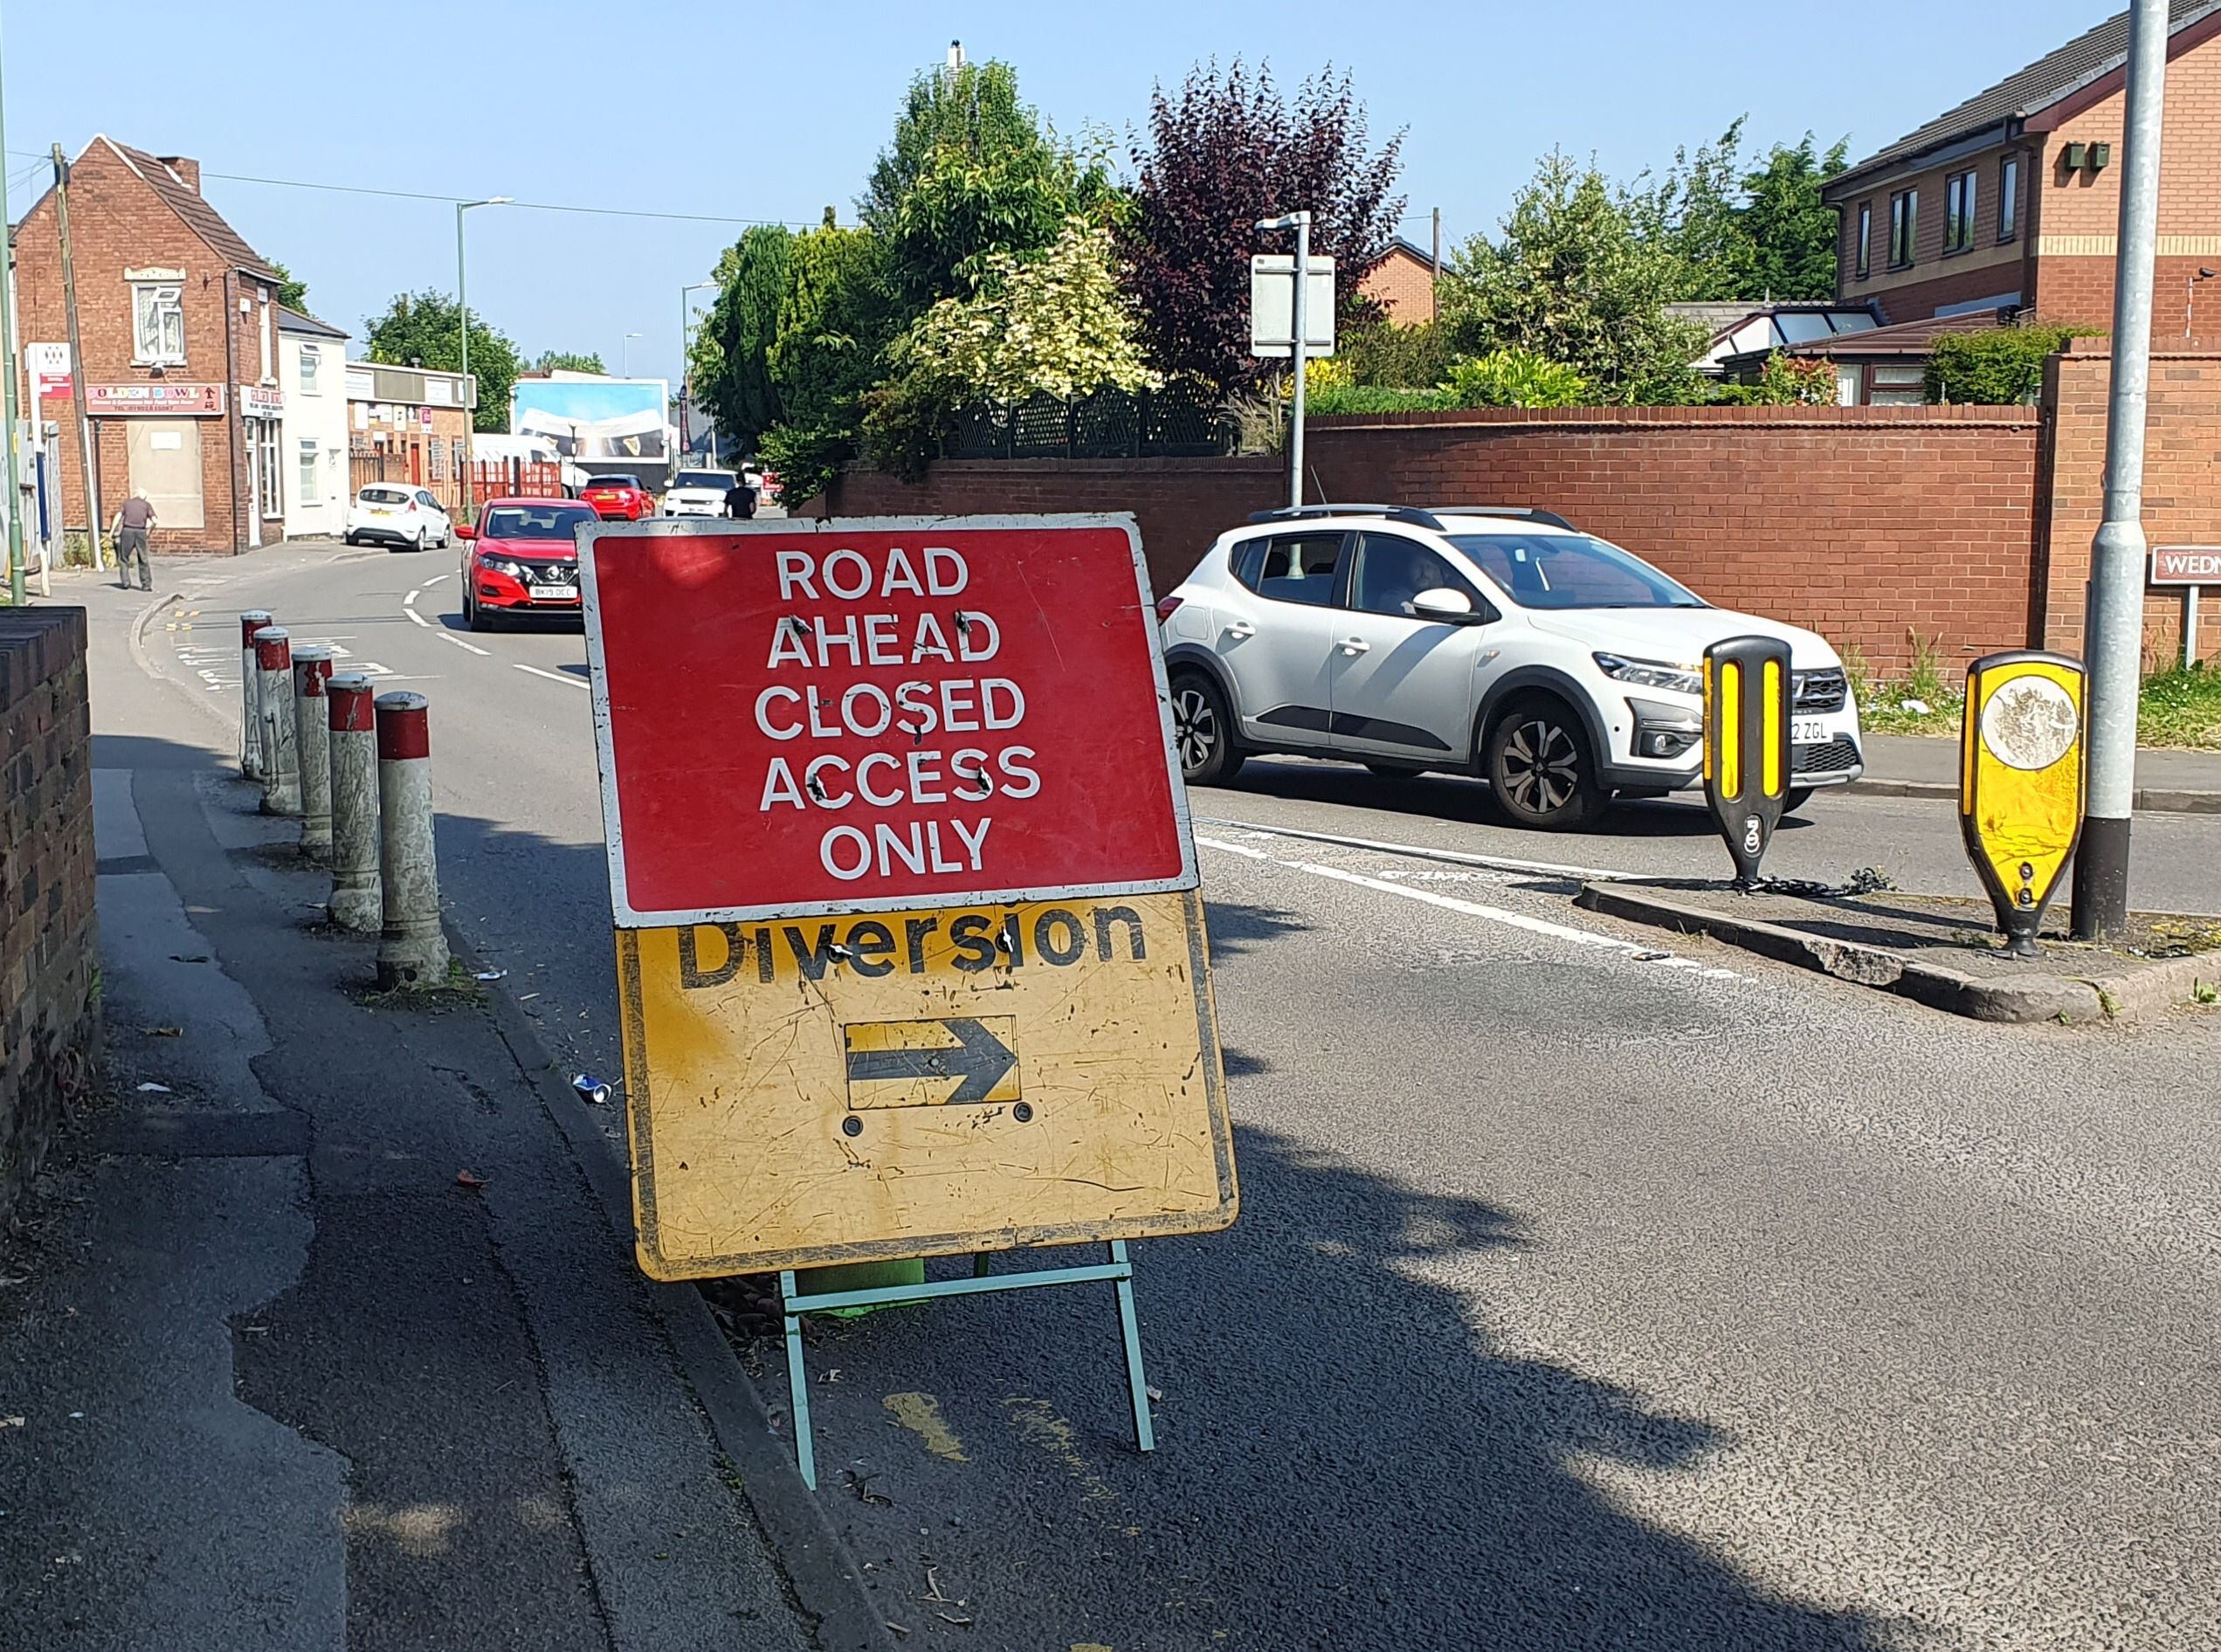 Drivers continue to pass 'road closed' sign - no sign of work taking place